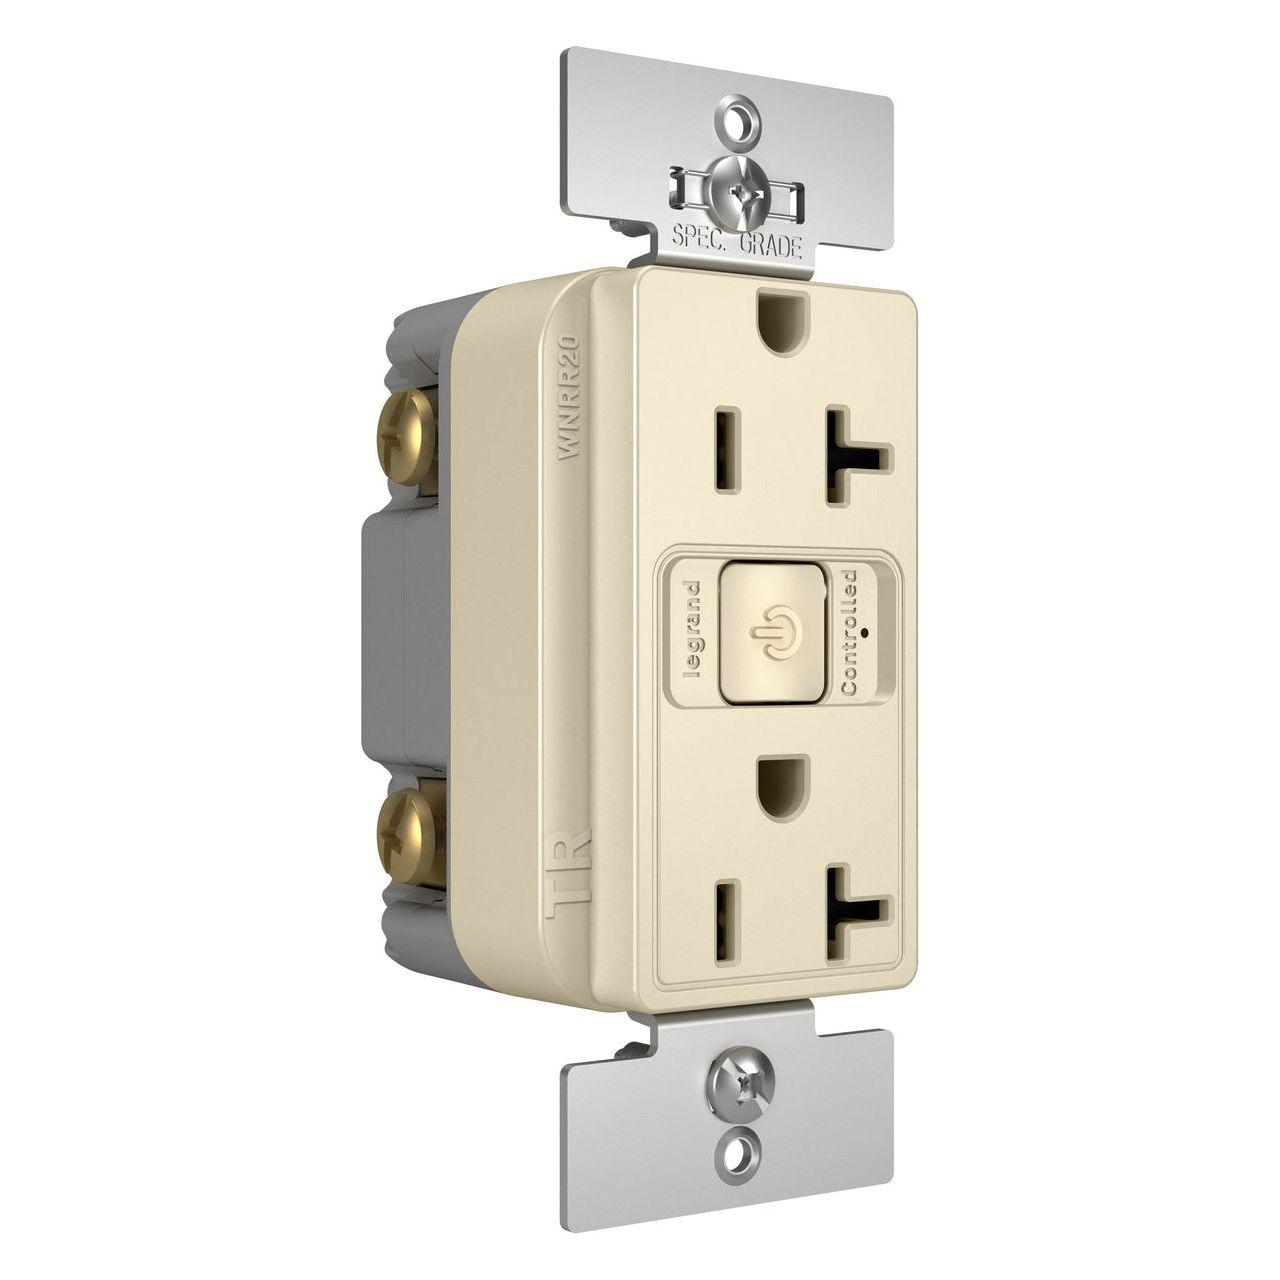 Legrand - Smart 20A Outlet with Netatmo - Lights Canada